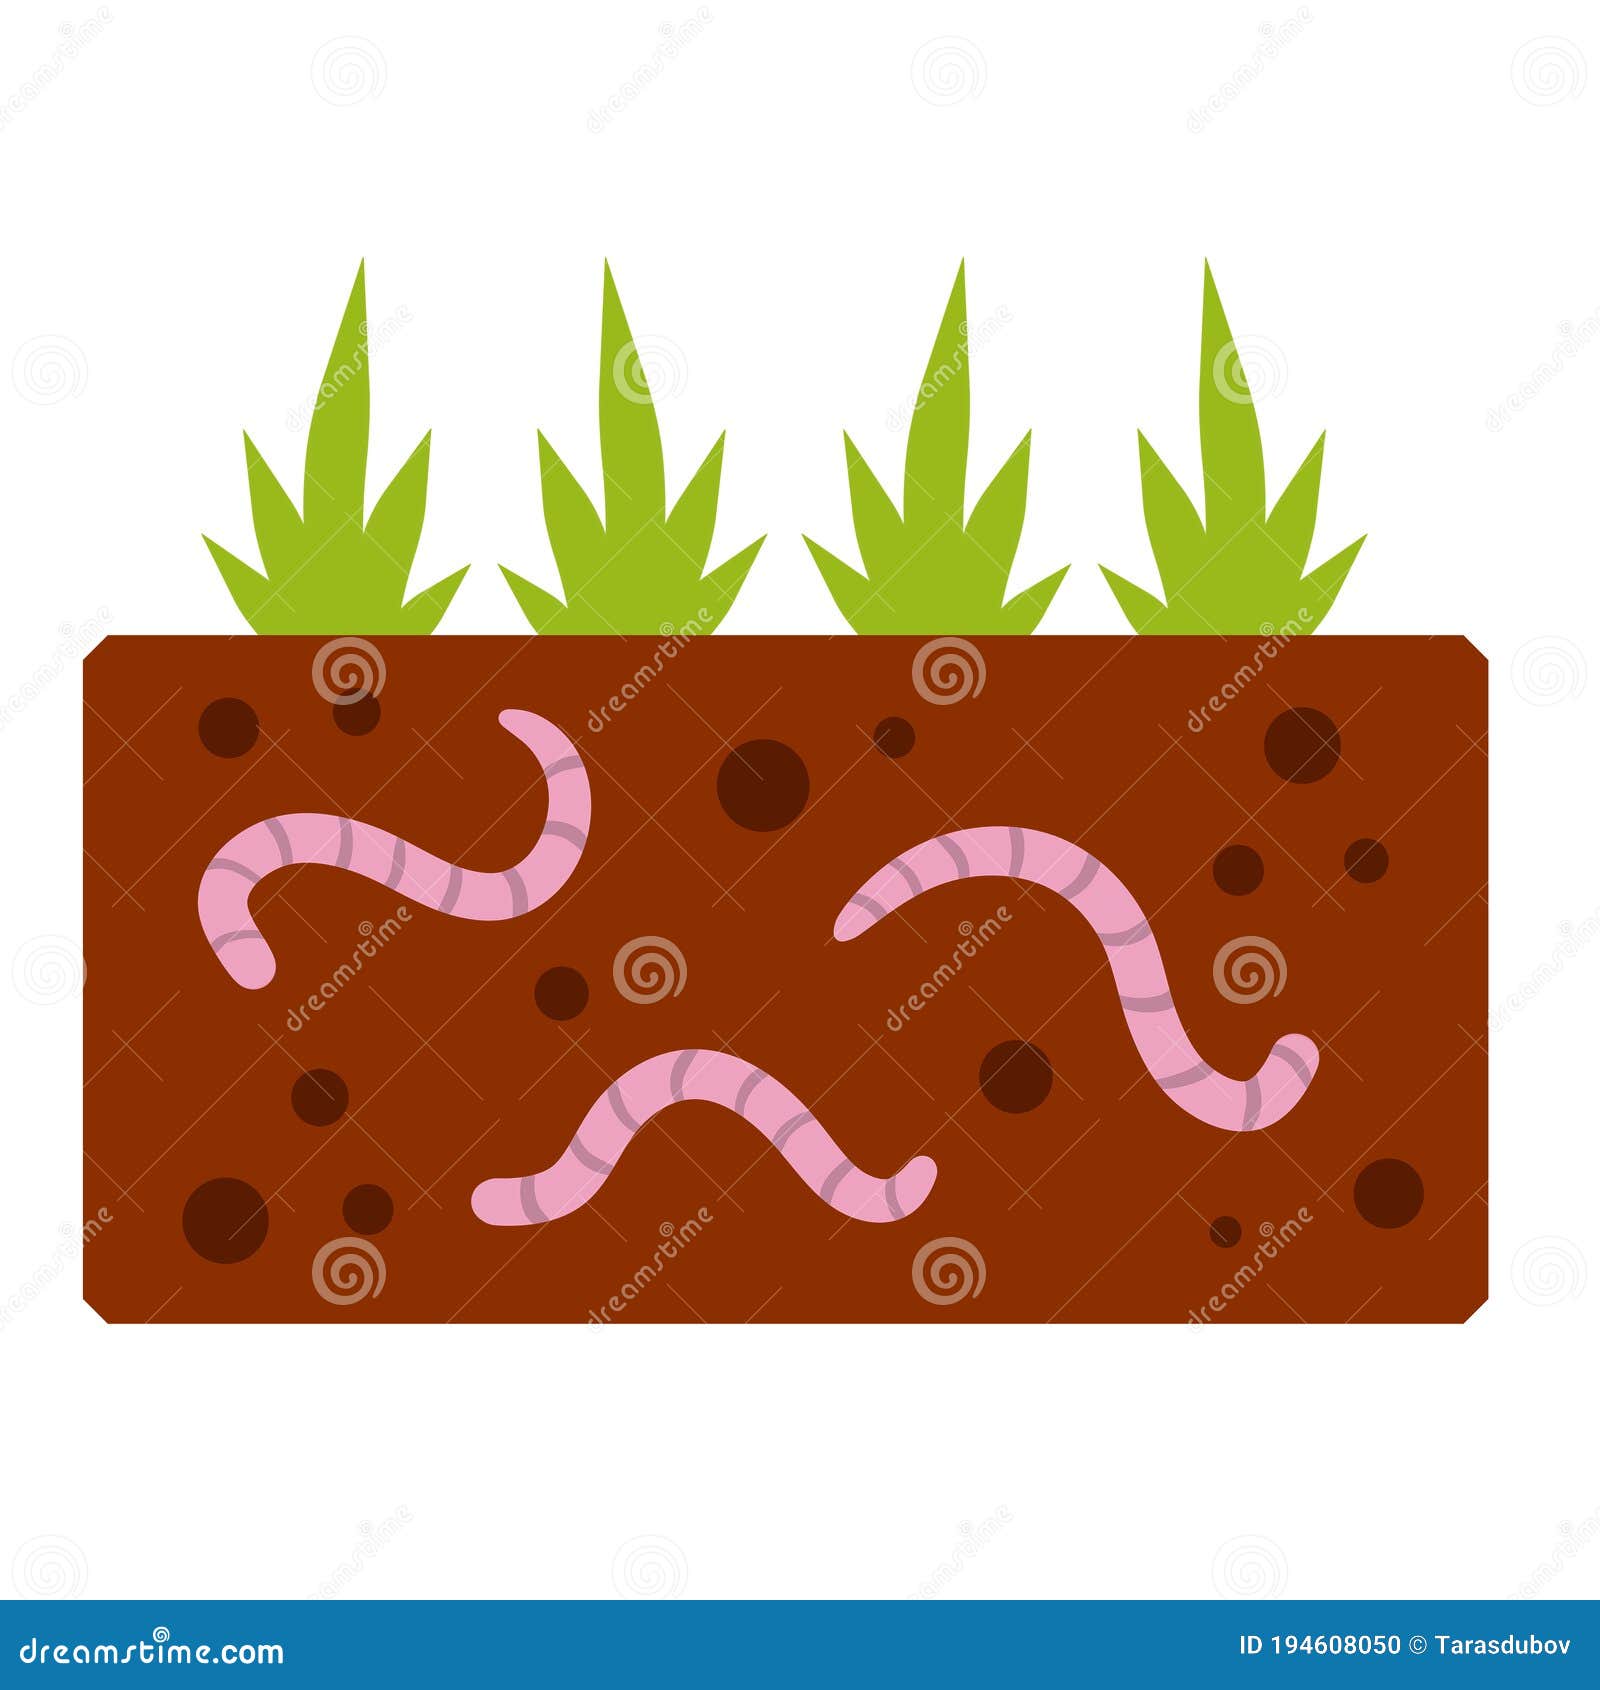 Worms Under the Ground. Insects in Soil. Brown Earth with Small Pink Animals.  Fishing Bait Stock Vector - Illustration of compost, ground: 194608050